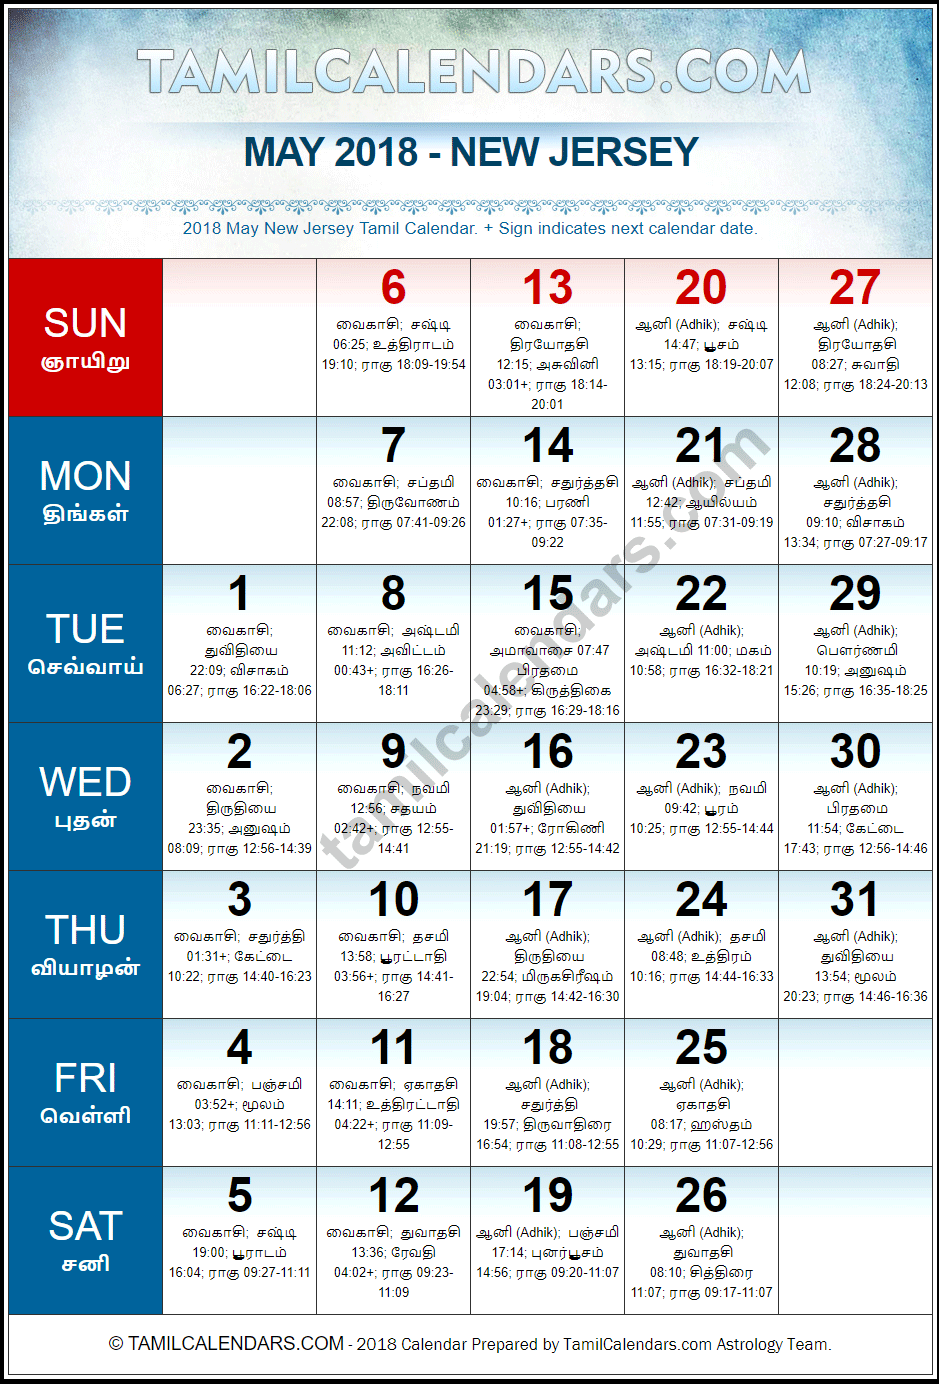 May 2018 Tamil Calendar for New Jersey, USA